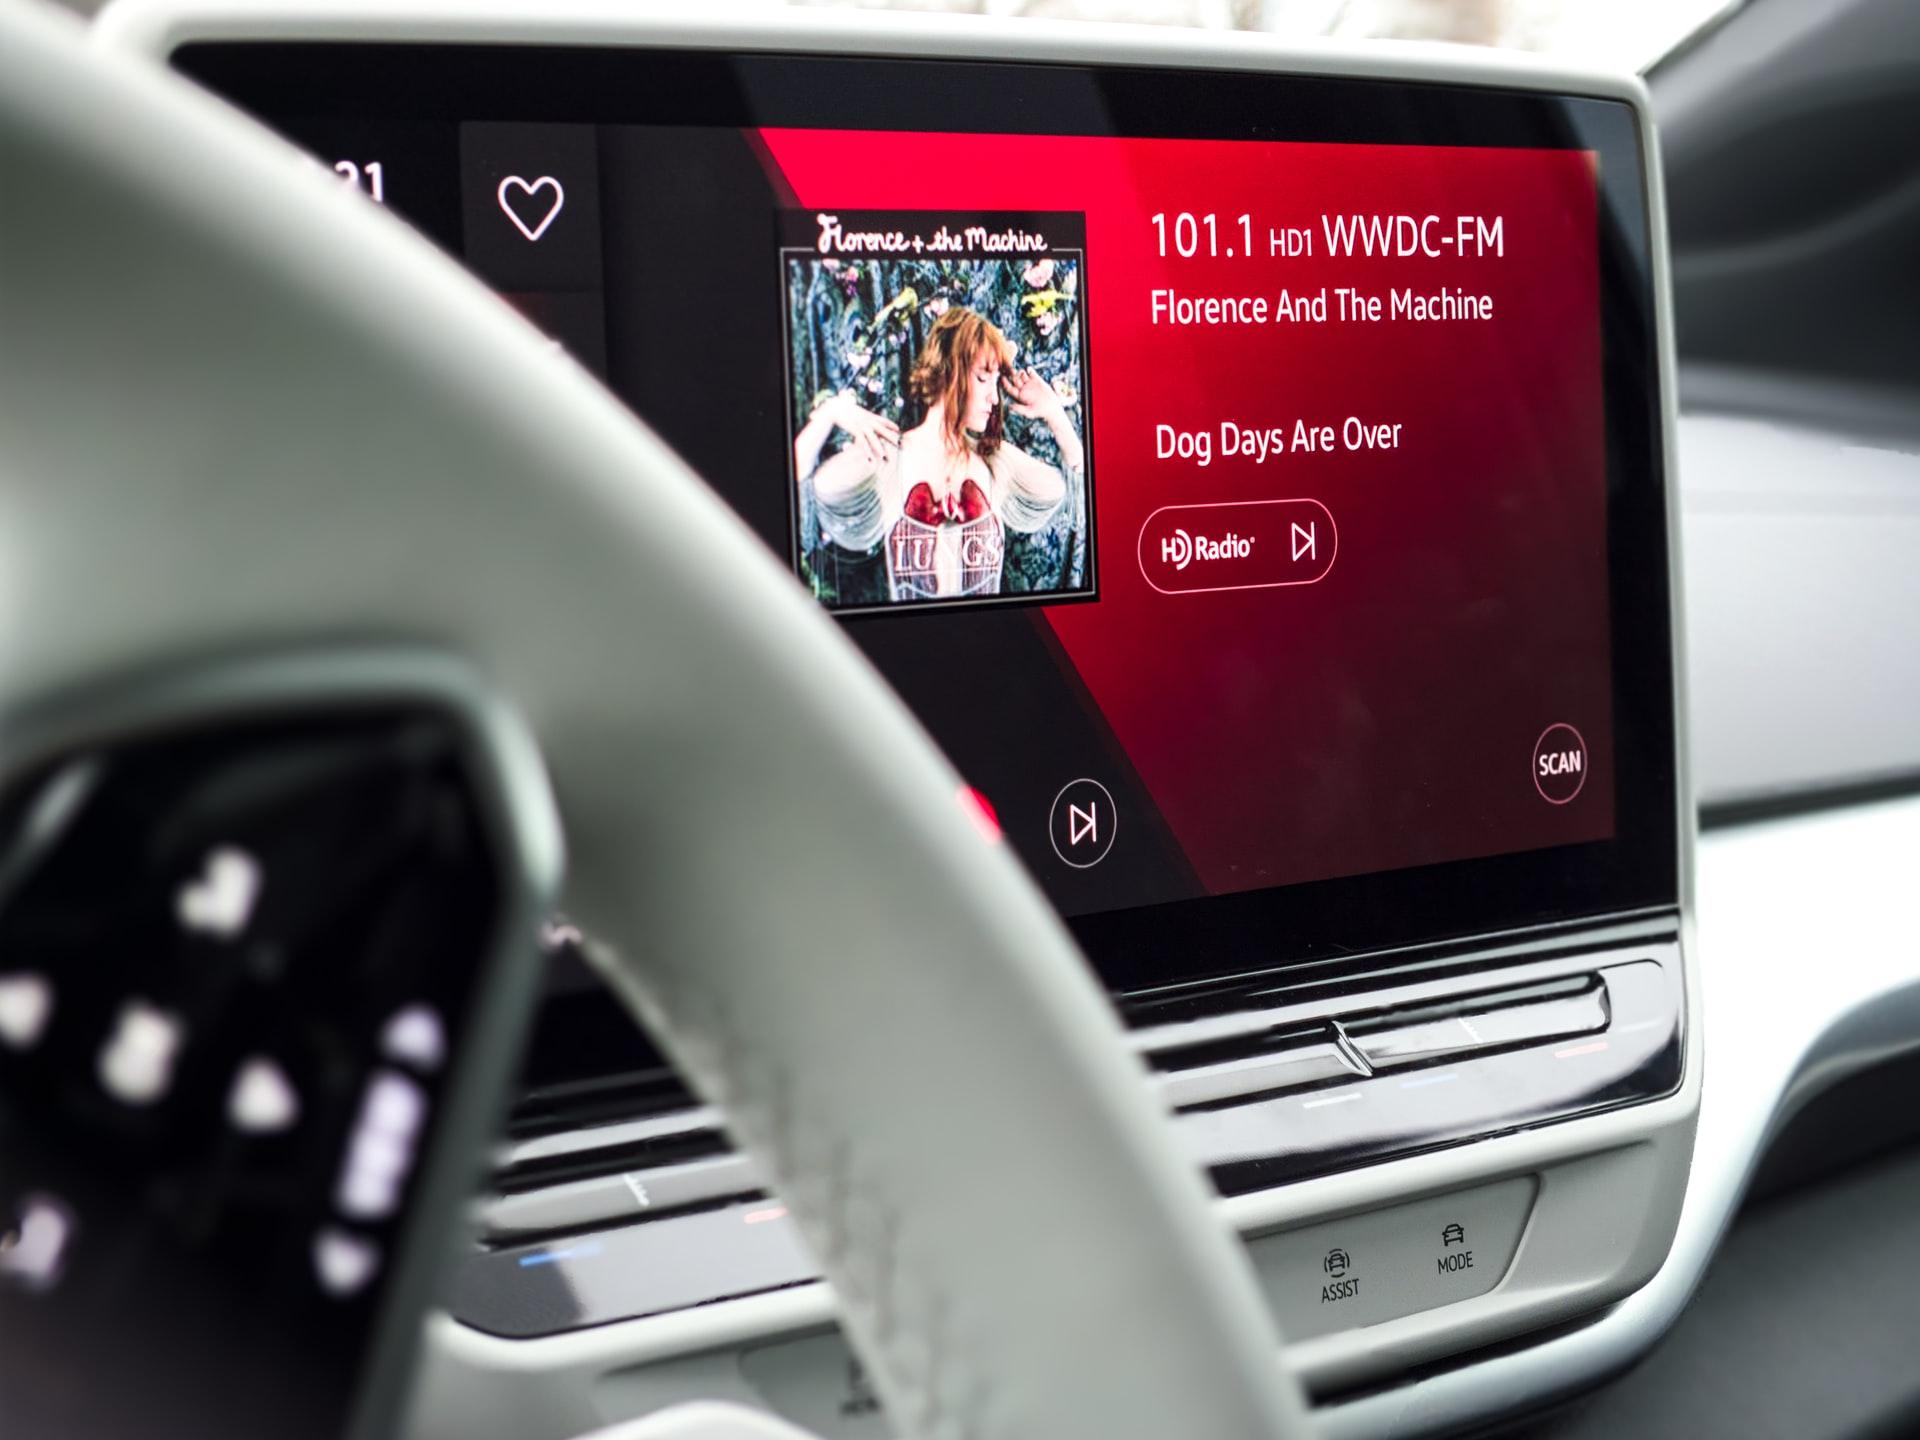 Infiniti is implementing free Apple CarPlay upgrades to their 2020 Q-Series models.